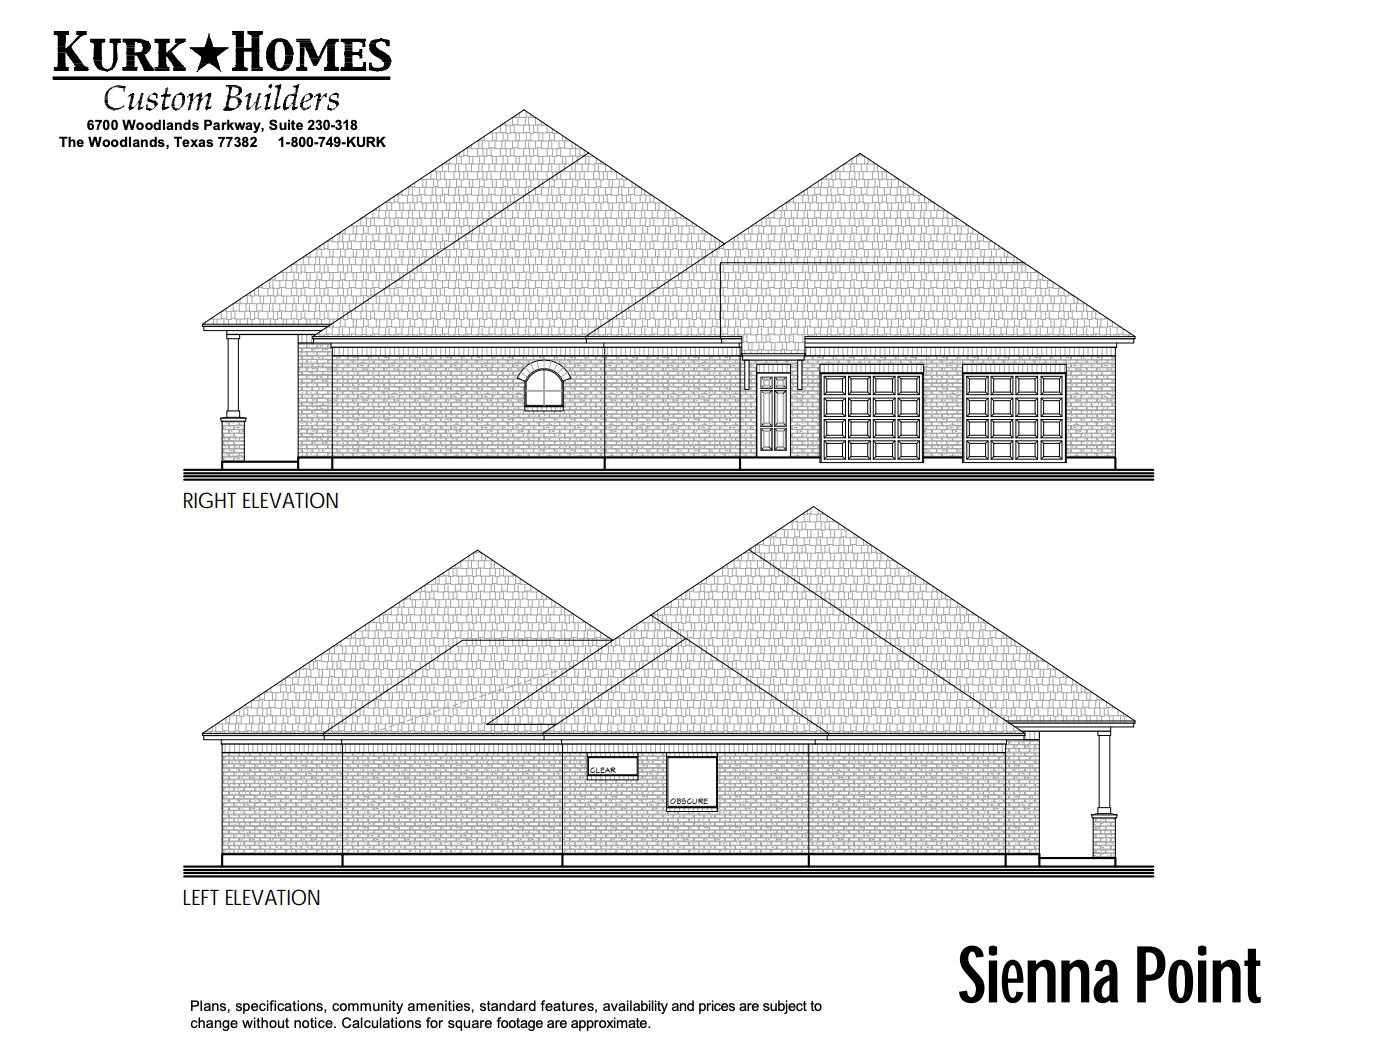 The Sienna Point - Side Elevation